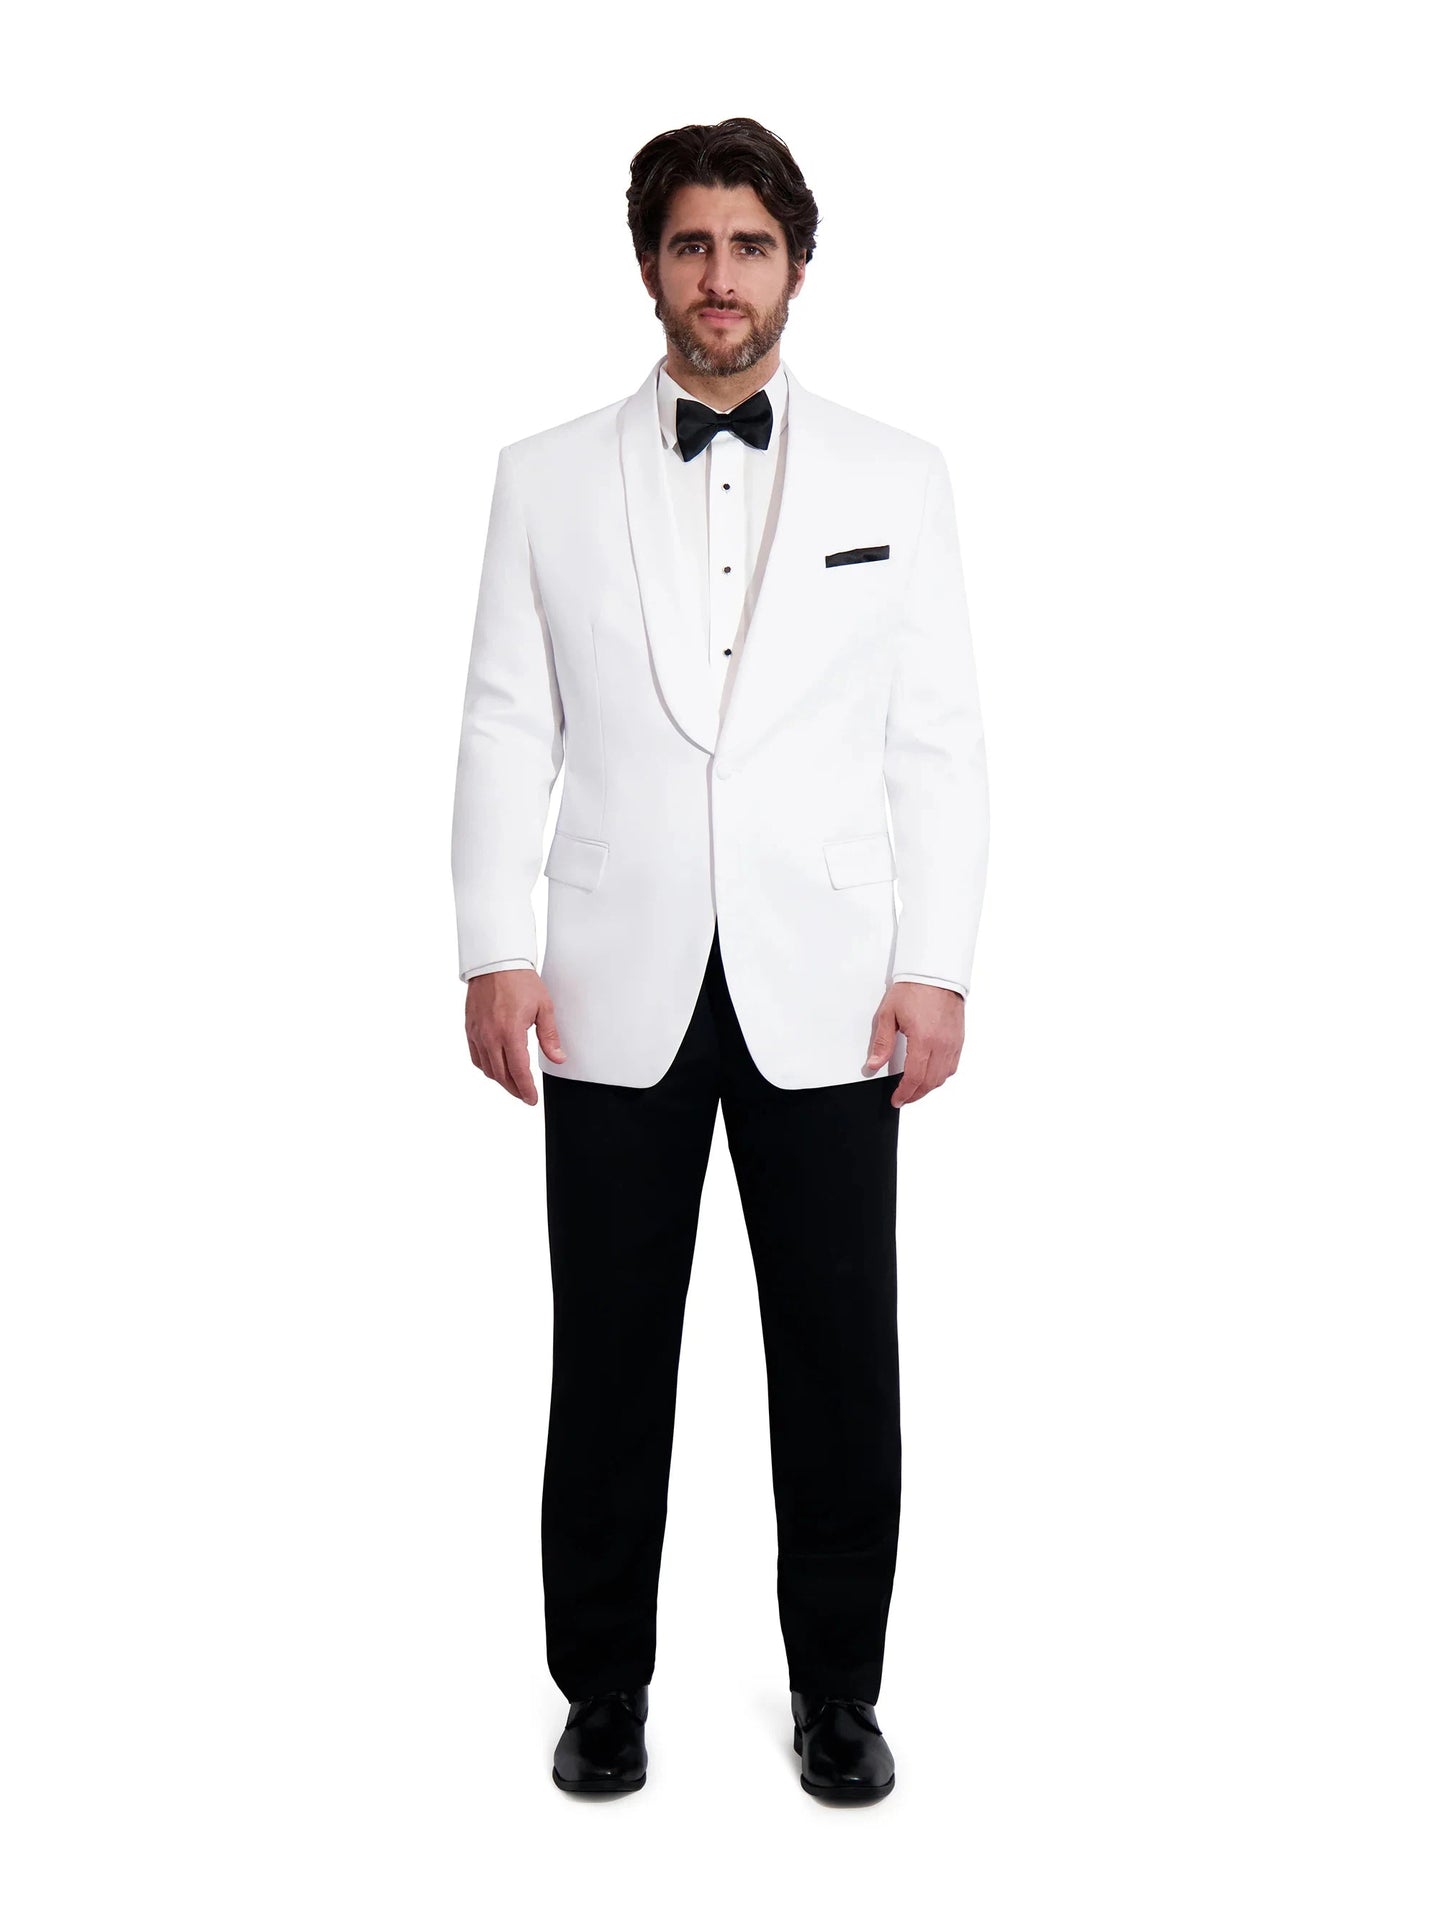 White Dinner Jacket - Classic 1 Button Shawl Lapel